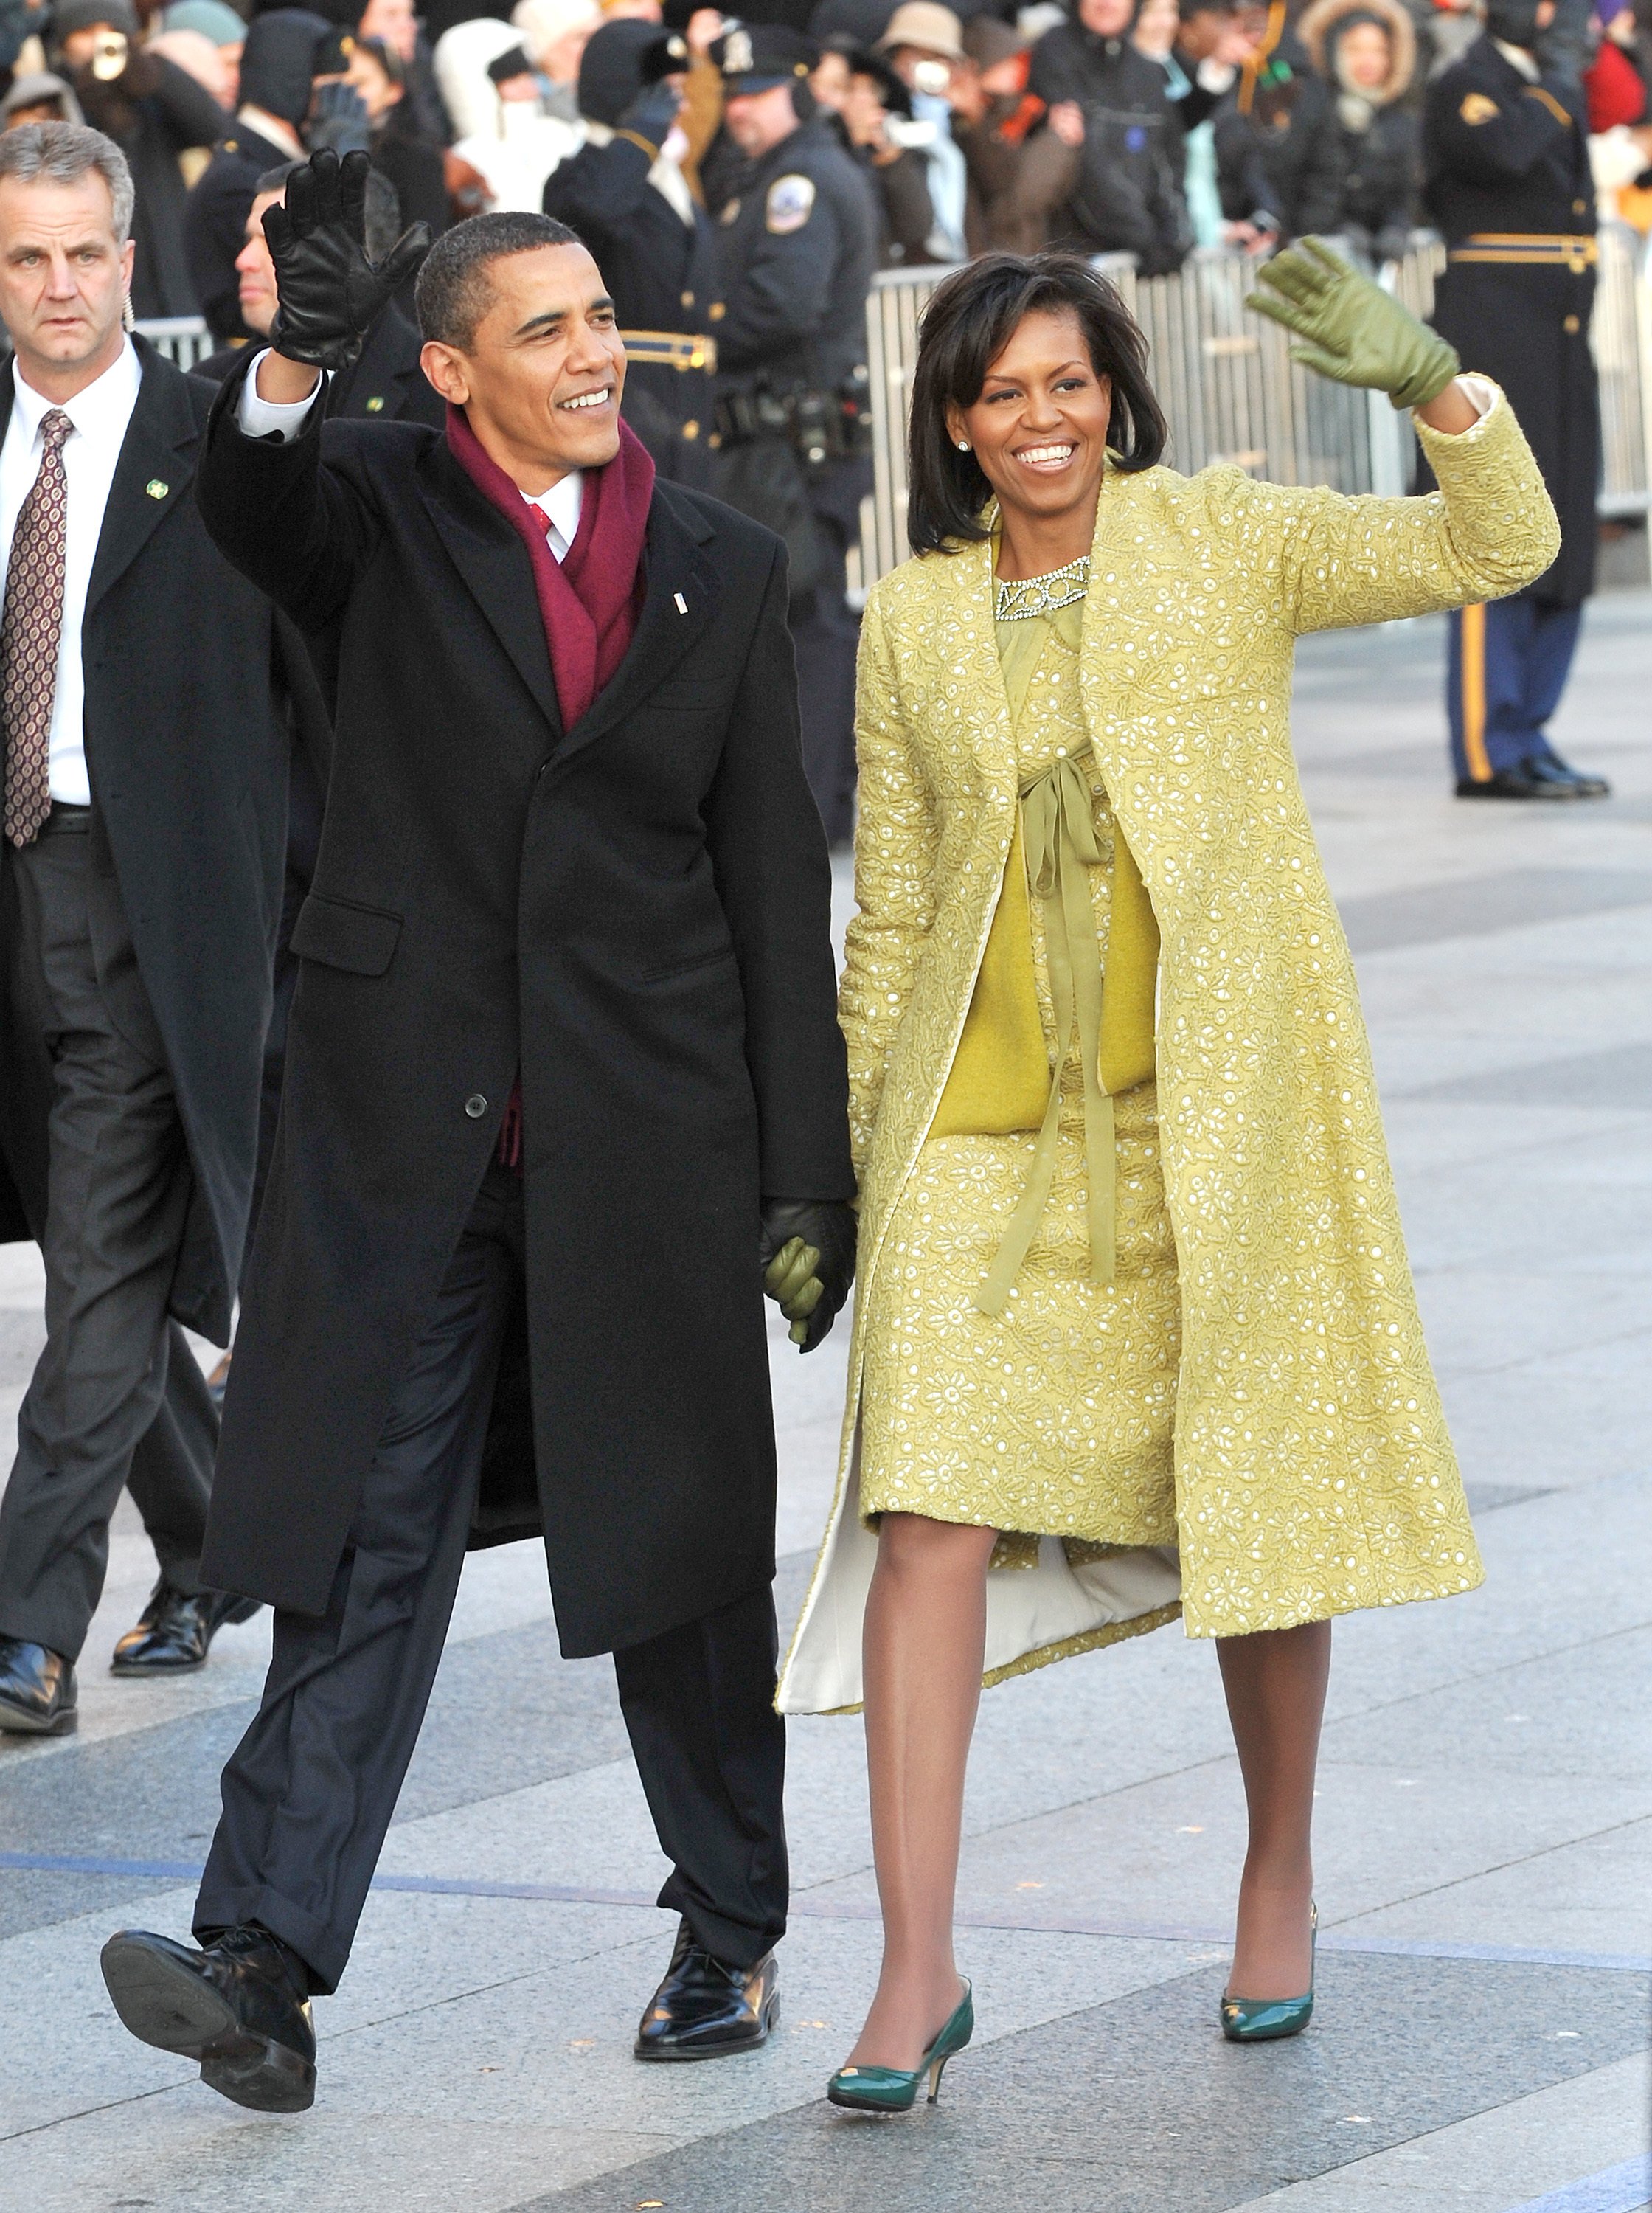 Michelle and Barack Obama partaking in the Inaugural Parade in Washington DC, January, 2009. | Photo: Getty Images.